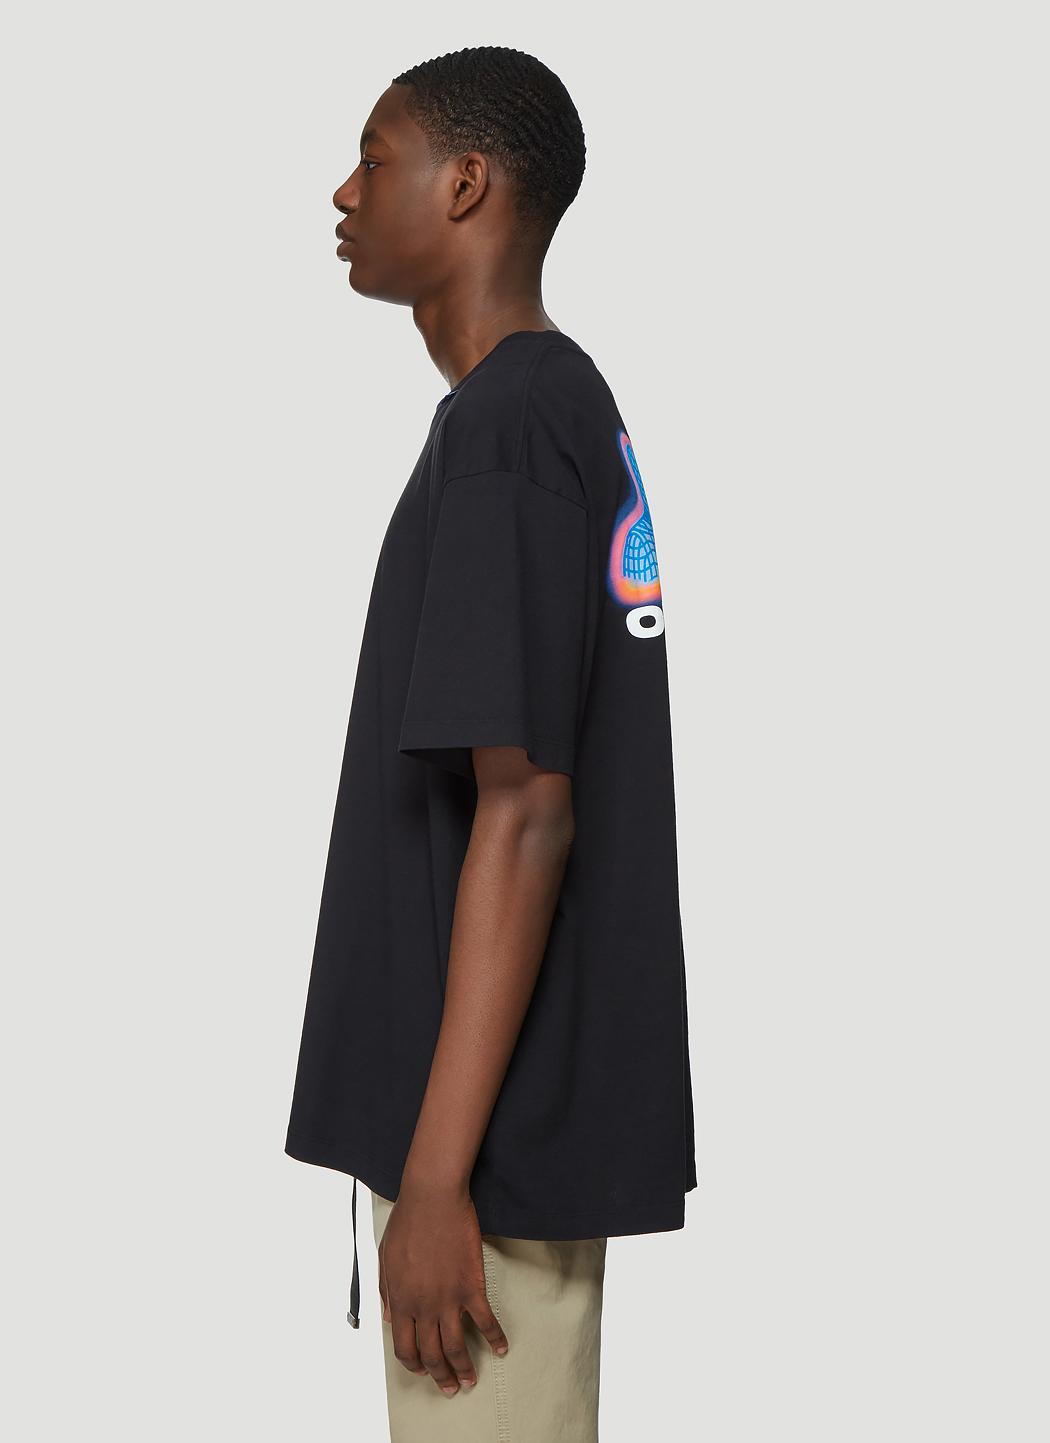 Off-White c/o Virgil Abloh Cotton Thermo Man Print T-shirt in Black for Men  - Lyst